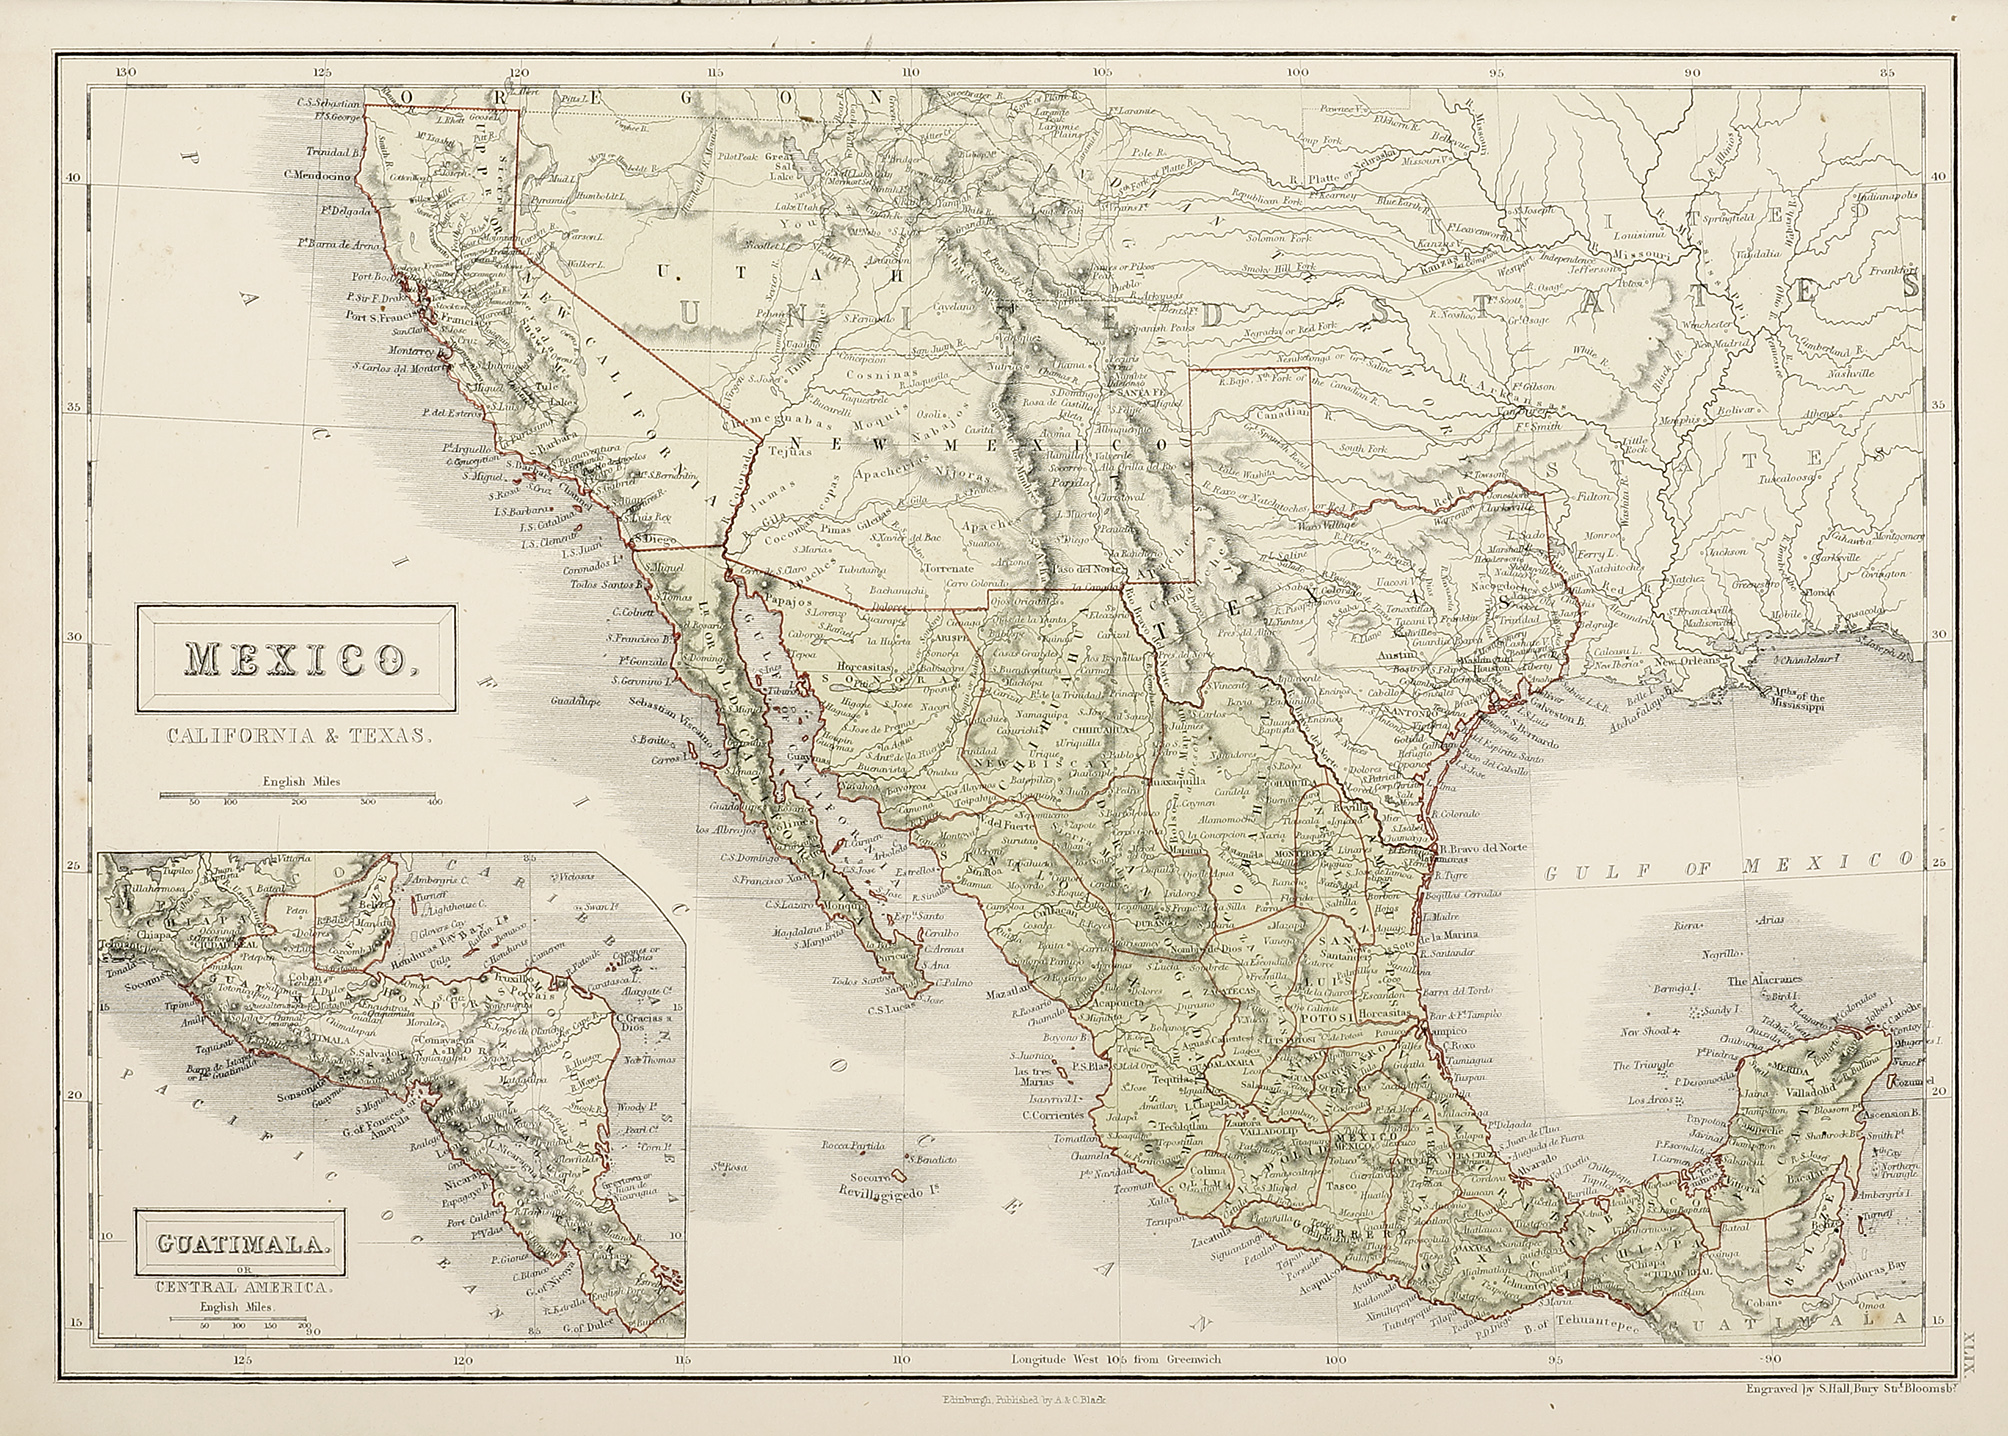 Mexico, Califonia & Texas. - Antique Map from 1859